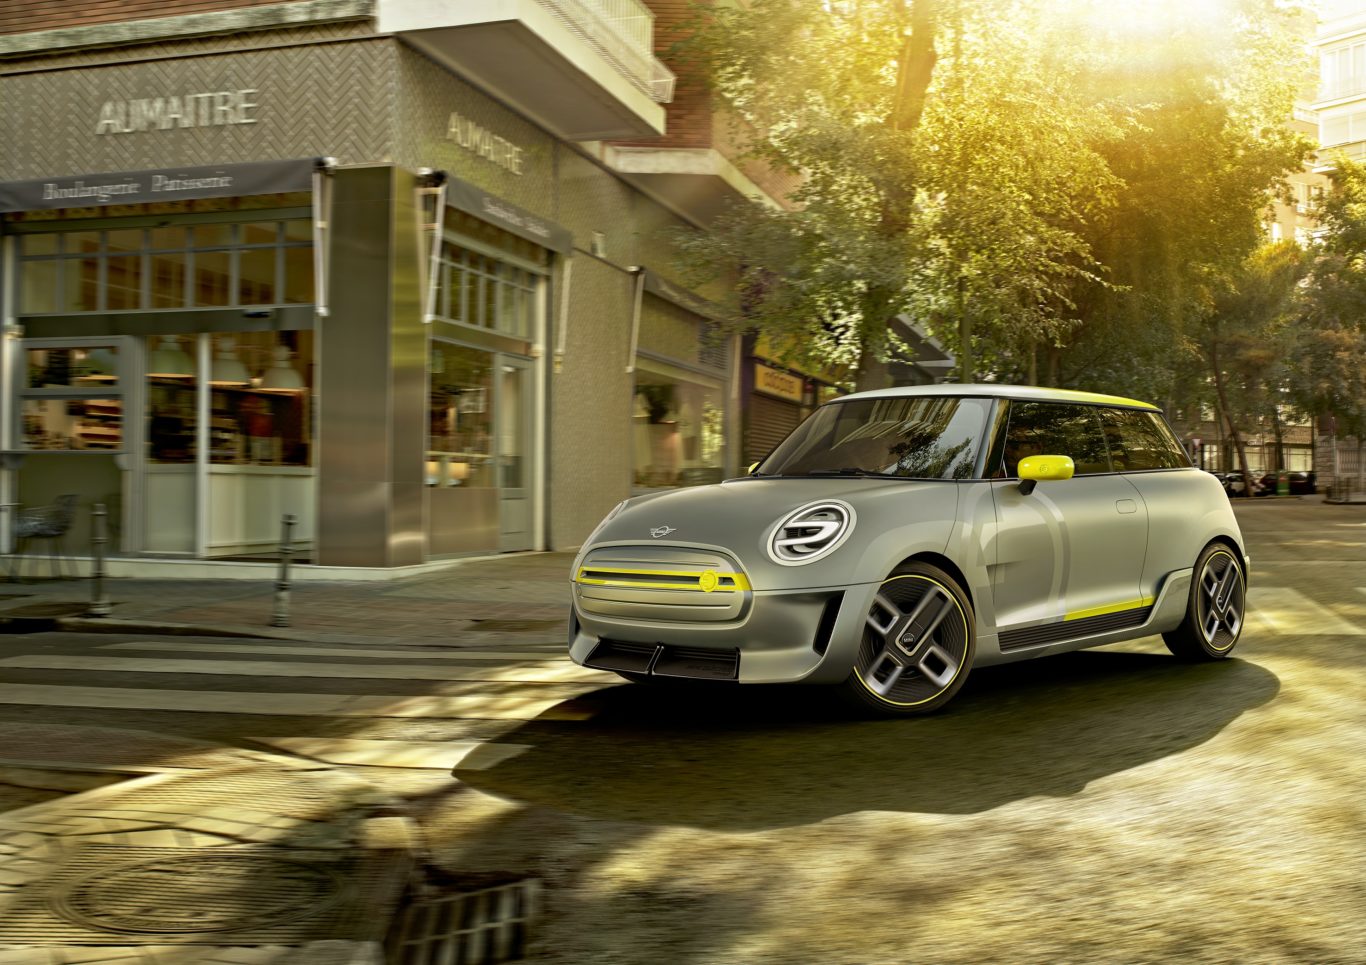 The new Mini EV is an all-electric take on the popular hatch